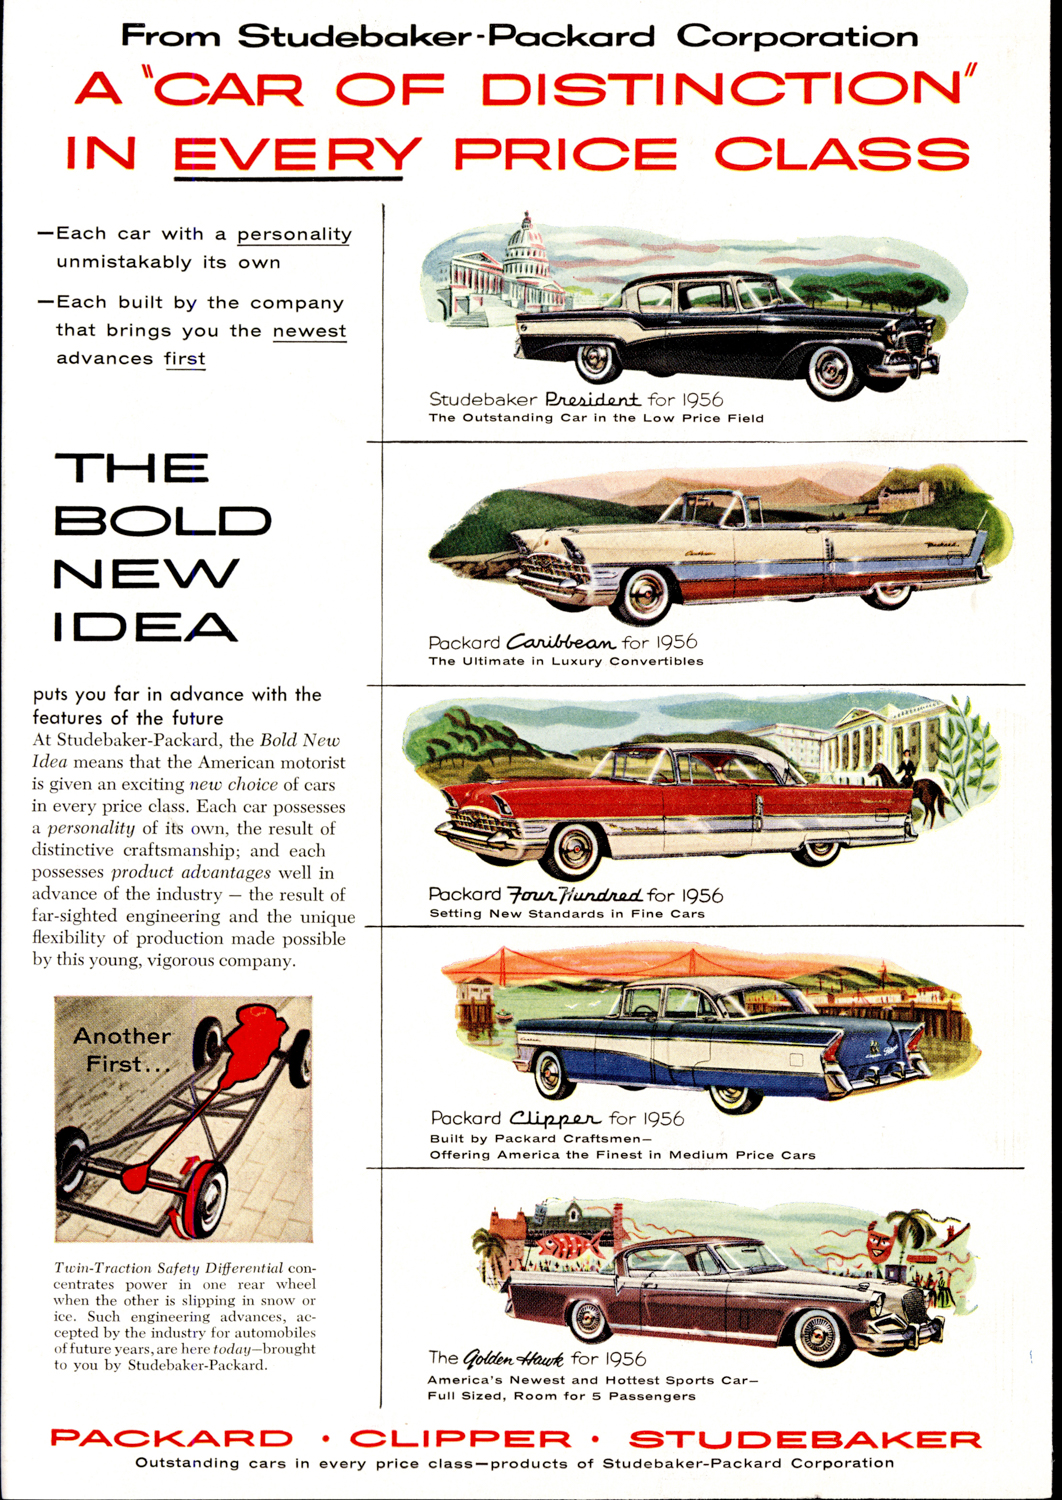 Studebaker-Packard sales were helped by the addition of the Hawk in 1956. 